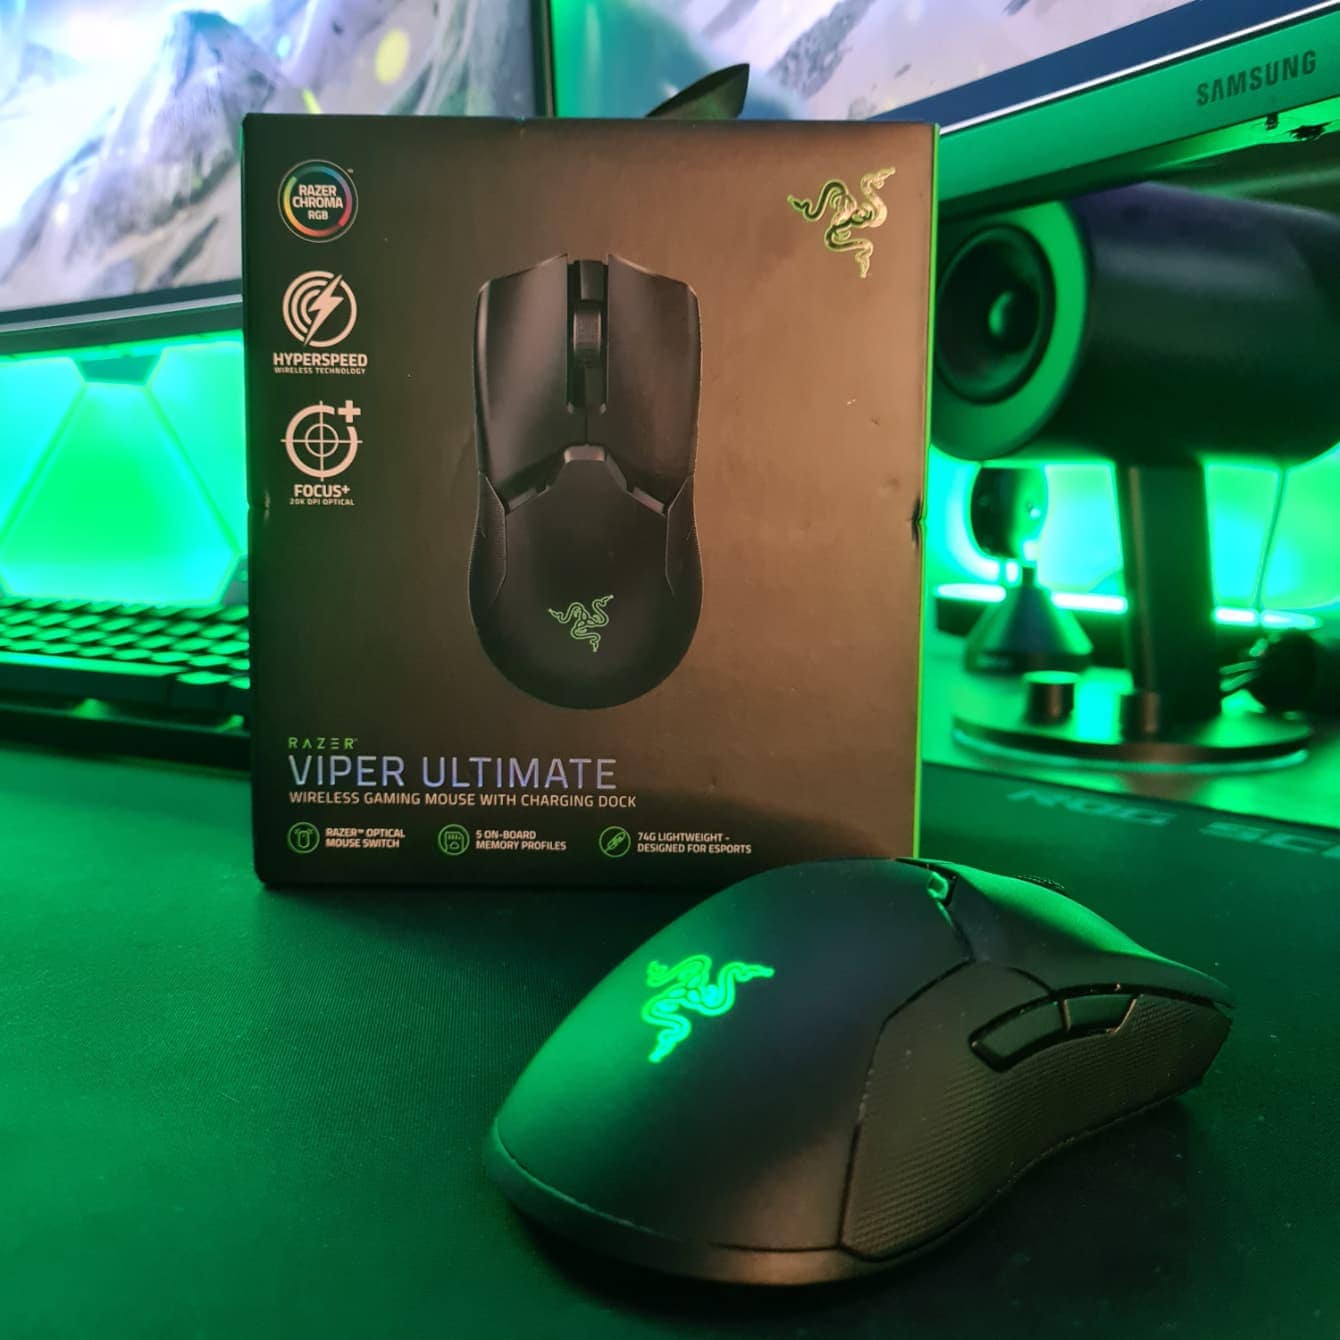 Razer viper ultimate mouse and product package